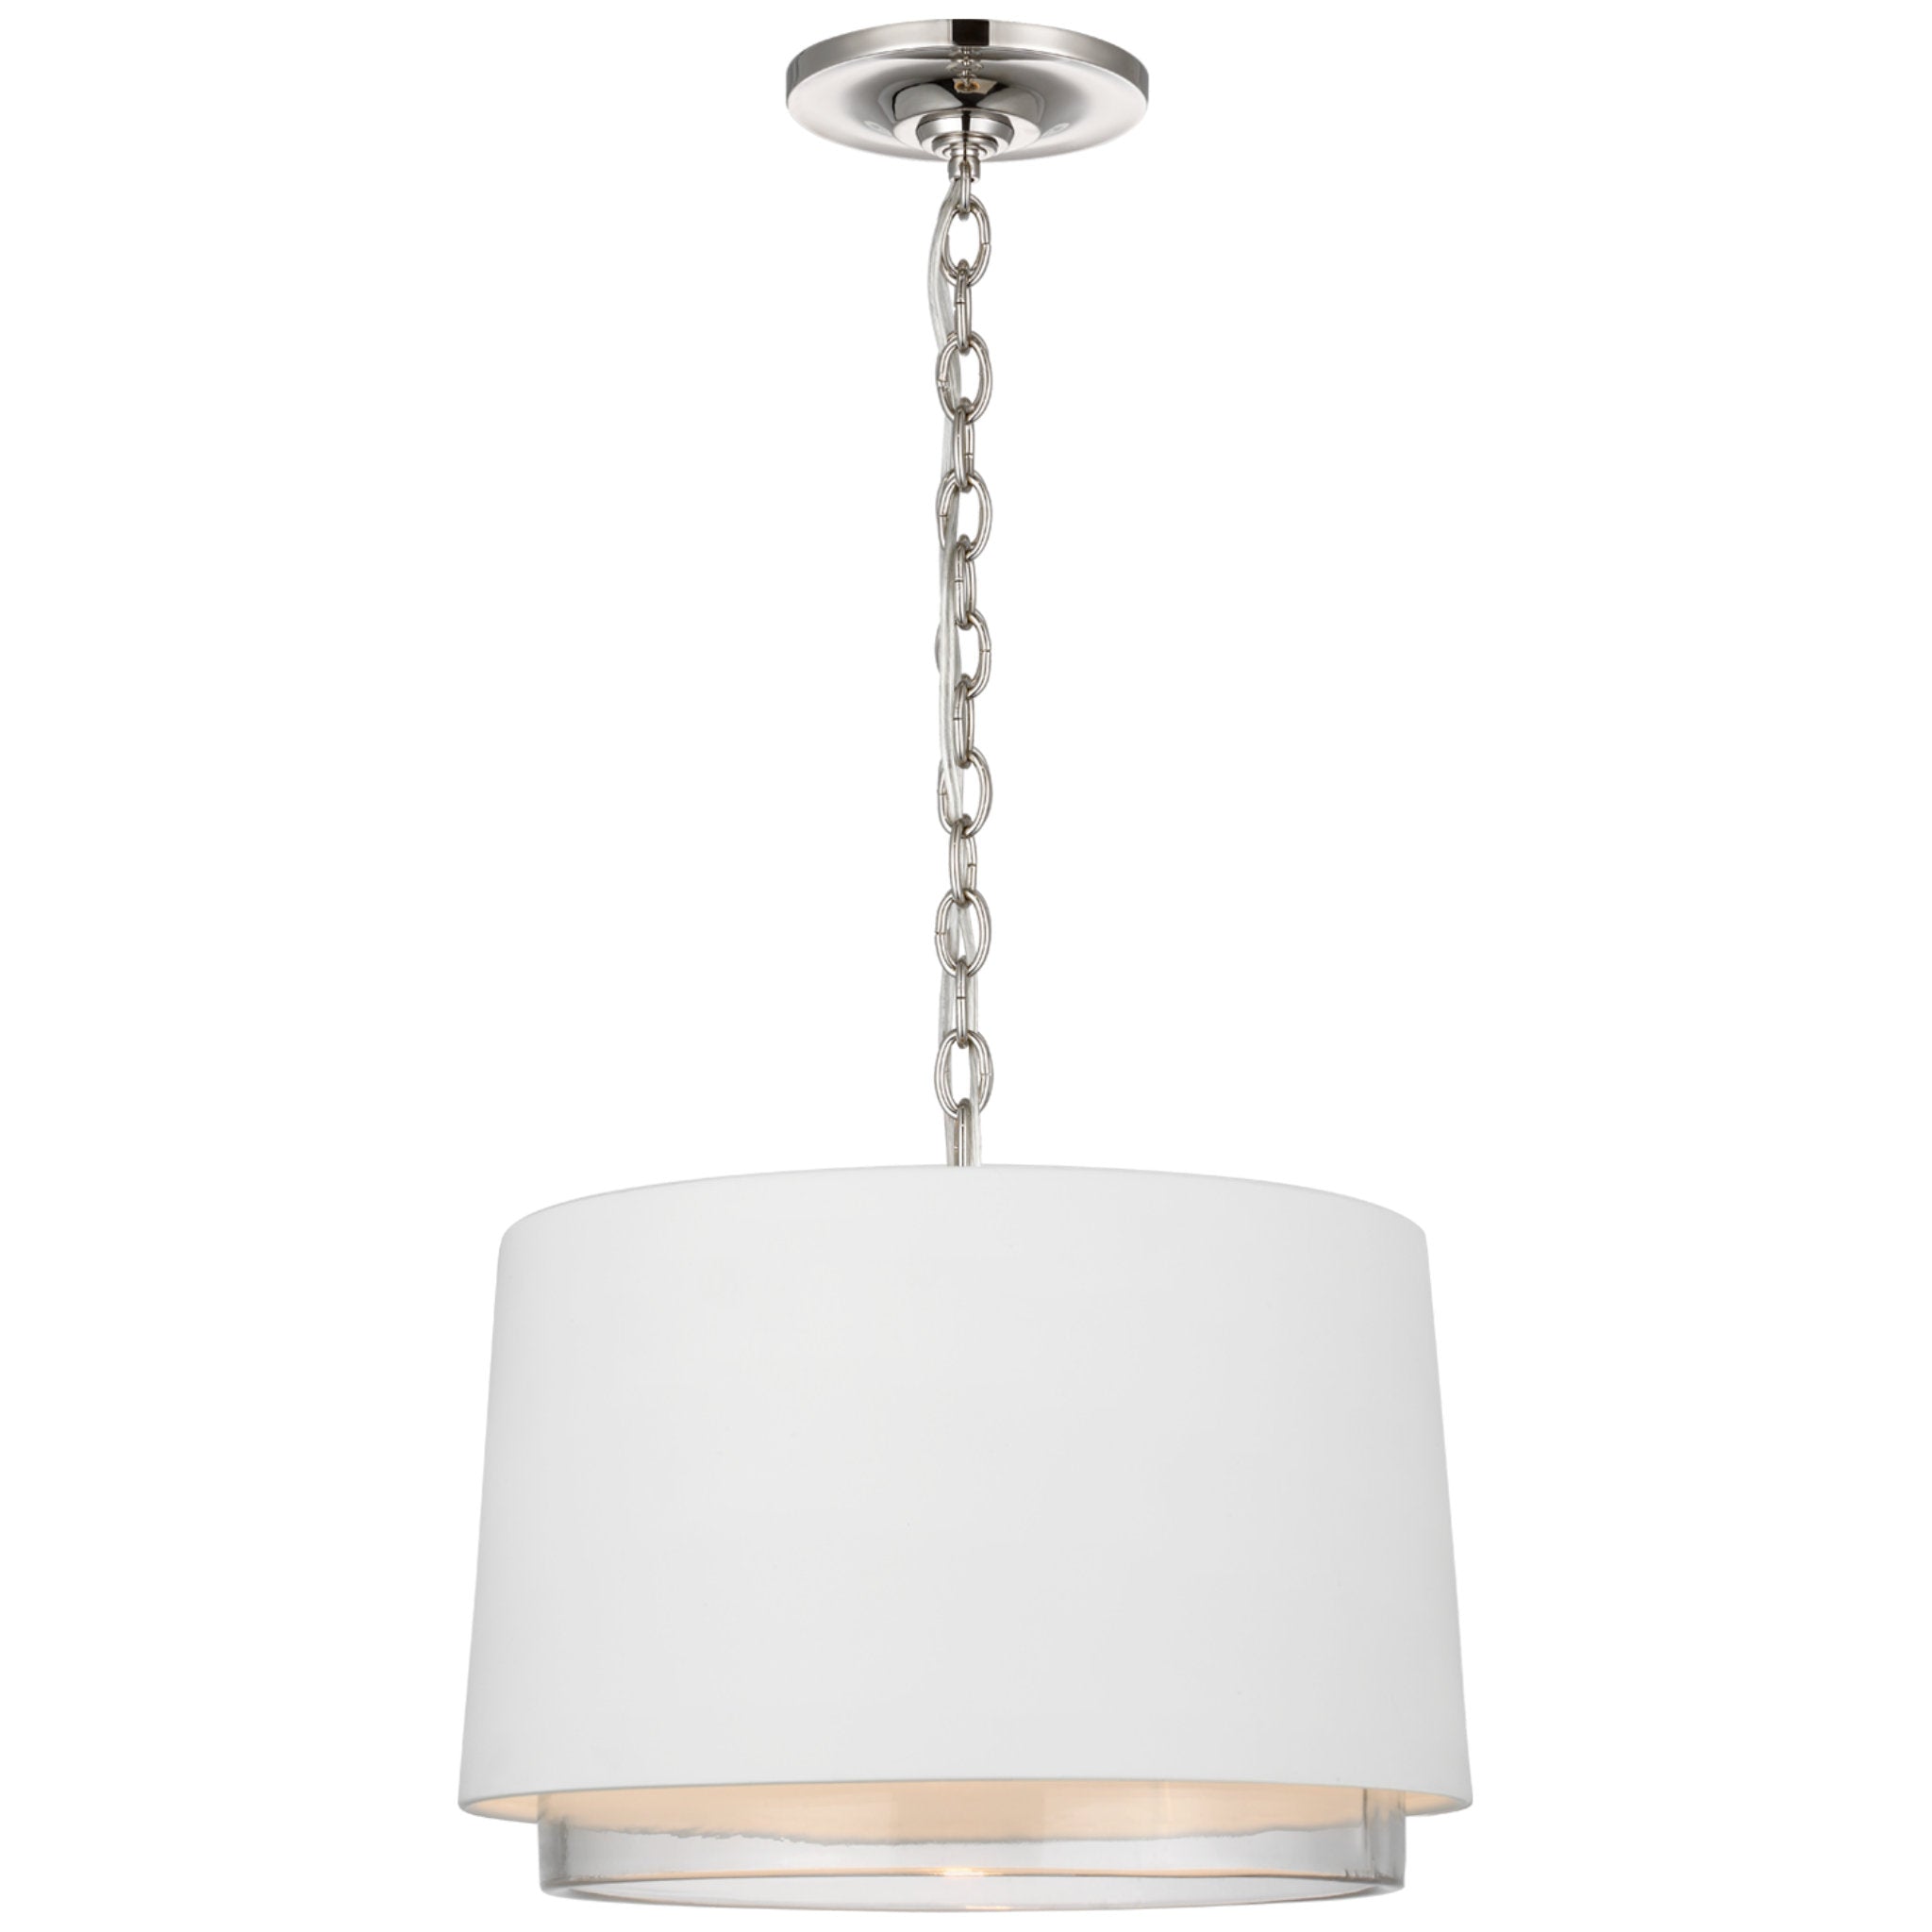 Marie Flanigan Sydney Small Pendant in Polished Nickel with Matte White Shade and Clear Glass